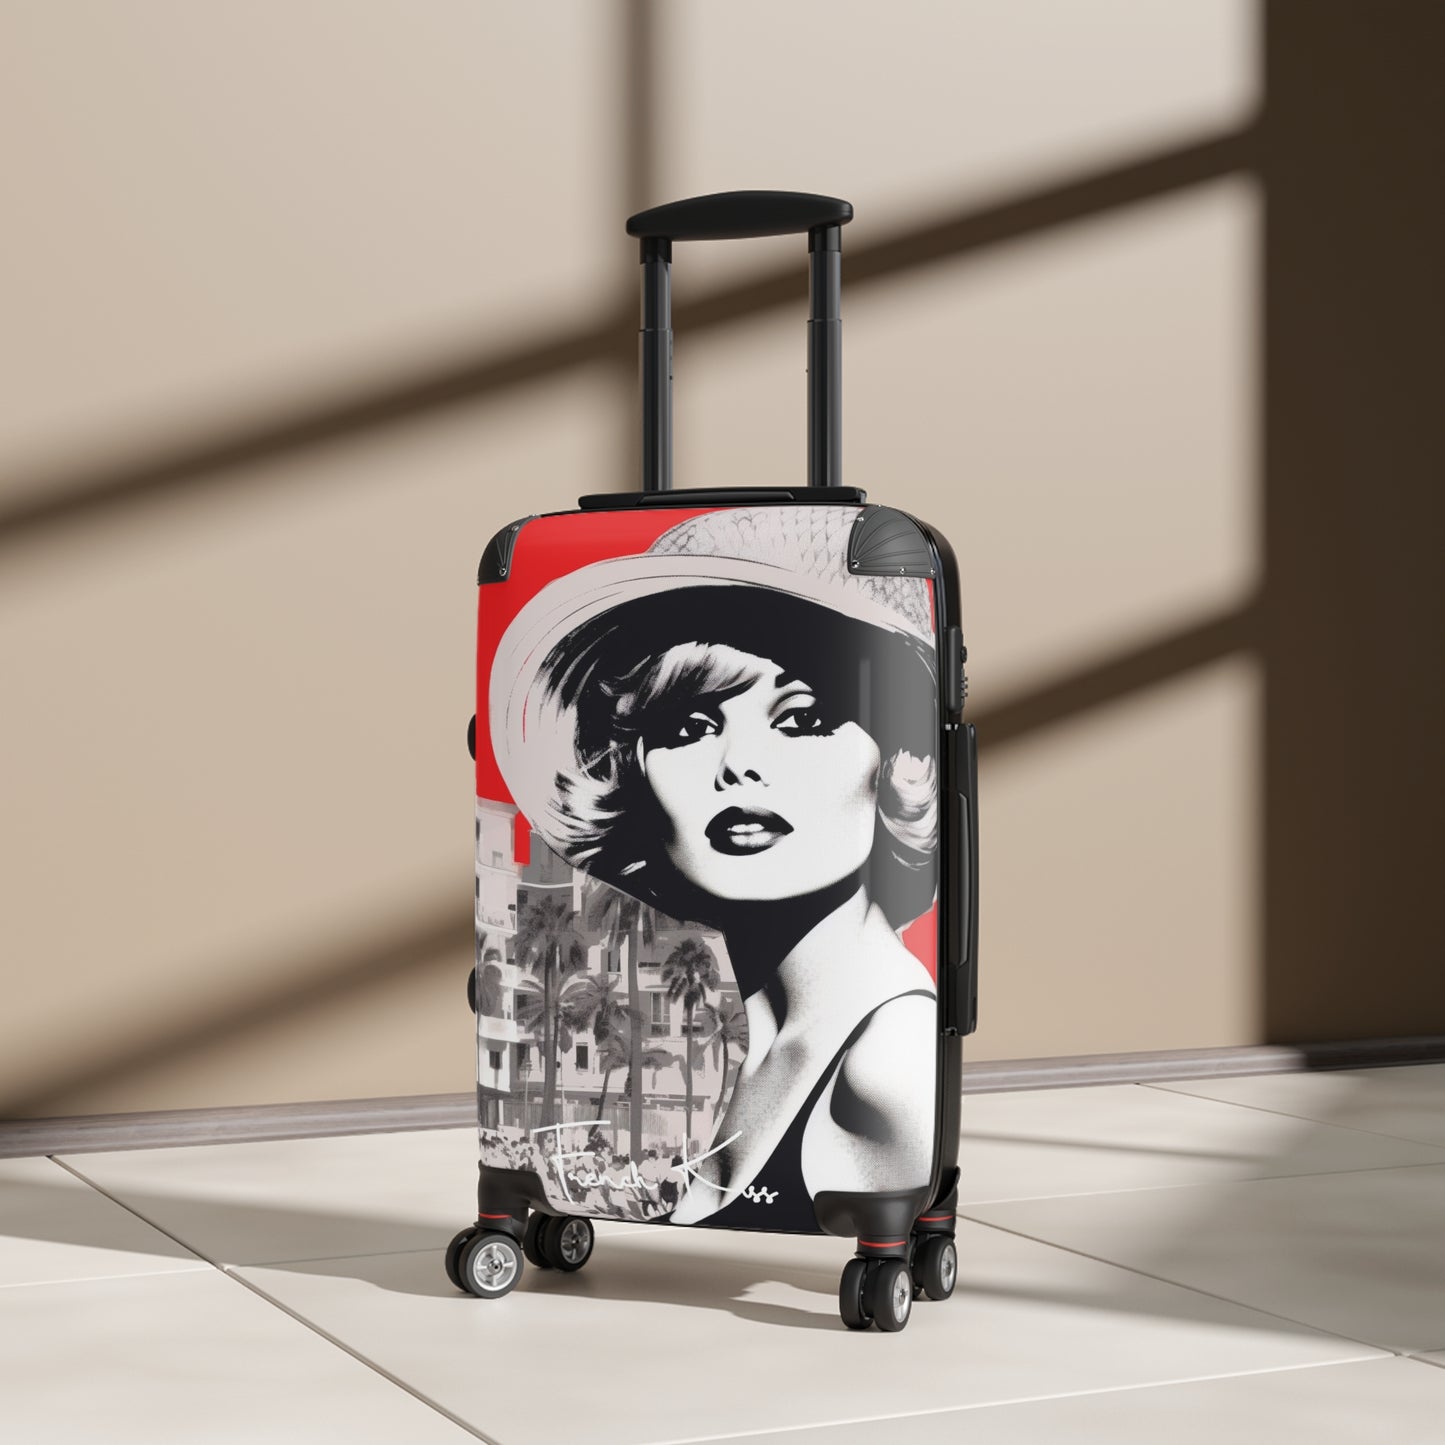 BISOUS French Kiss Pop Art, Travel, Suitcase, Fashion, Couture, Designer, Pop Art, Chic, Jetset, Luggage